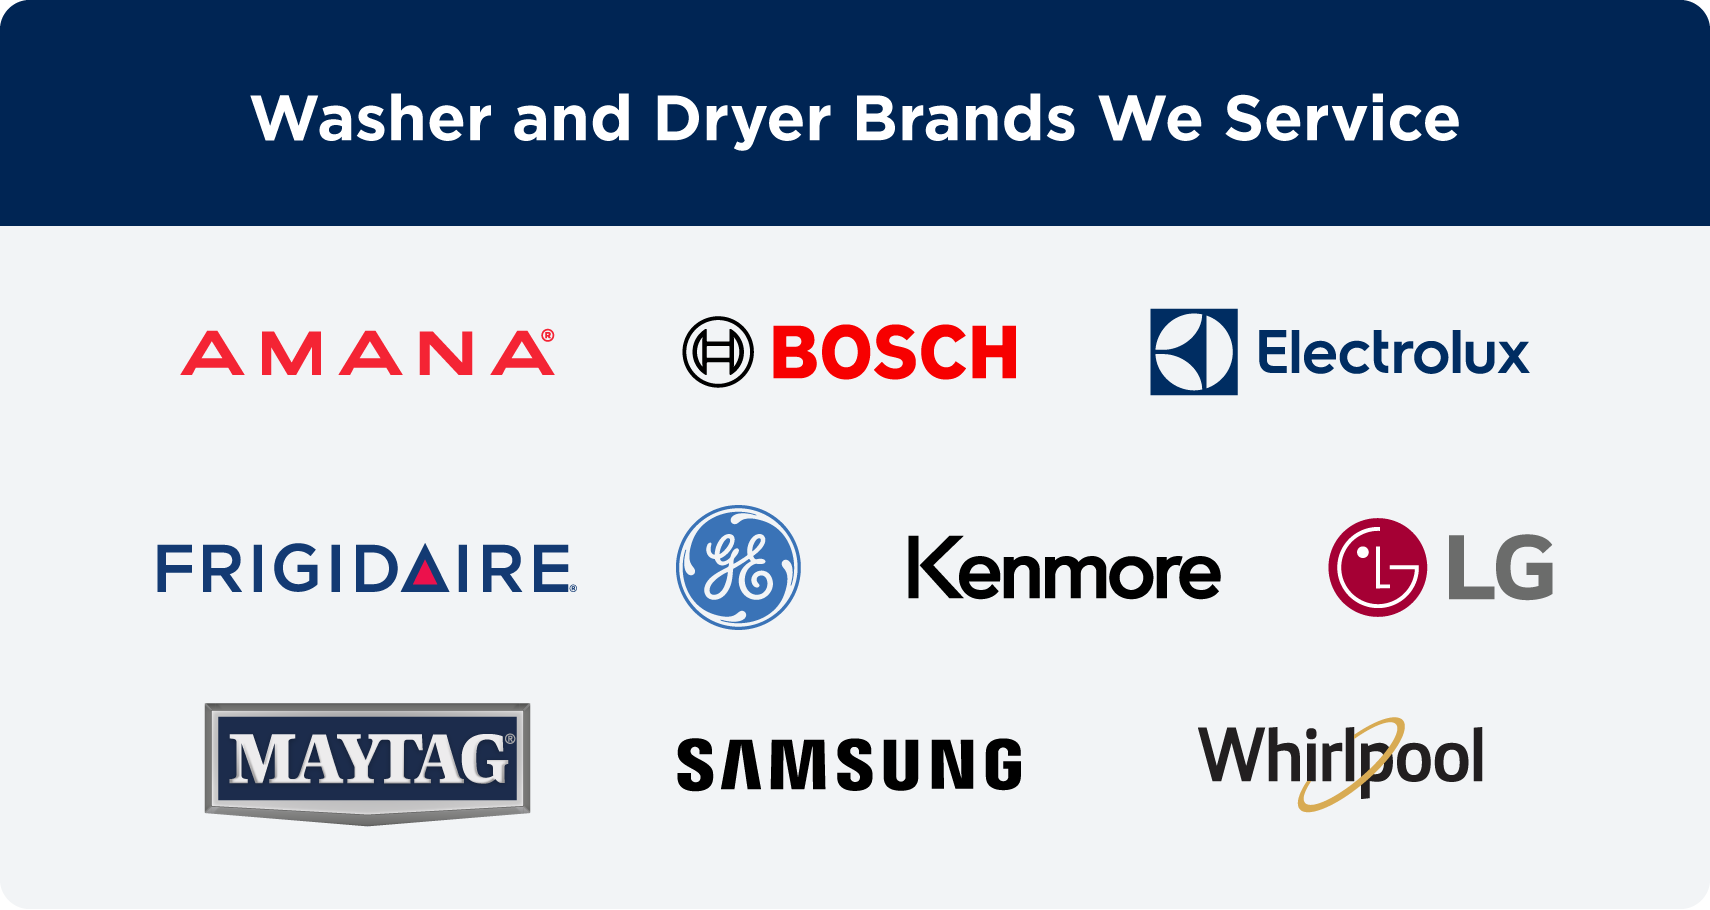 Washer and dryer brand names and logos that Mr. Appliance services: Amana, Bosch, Electrolux, Frigidaire, GE, Kenmore, LG, Maytag, Samsung, Whirlpool